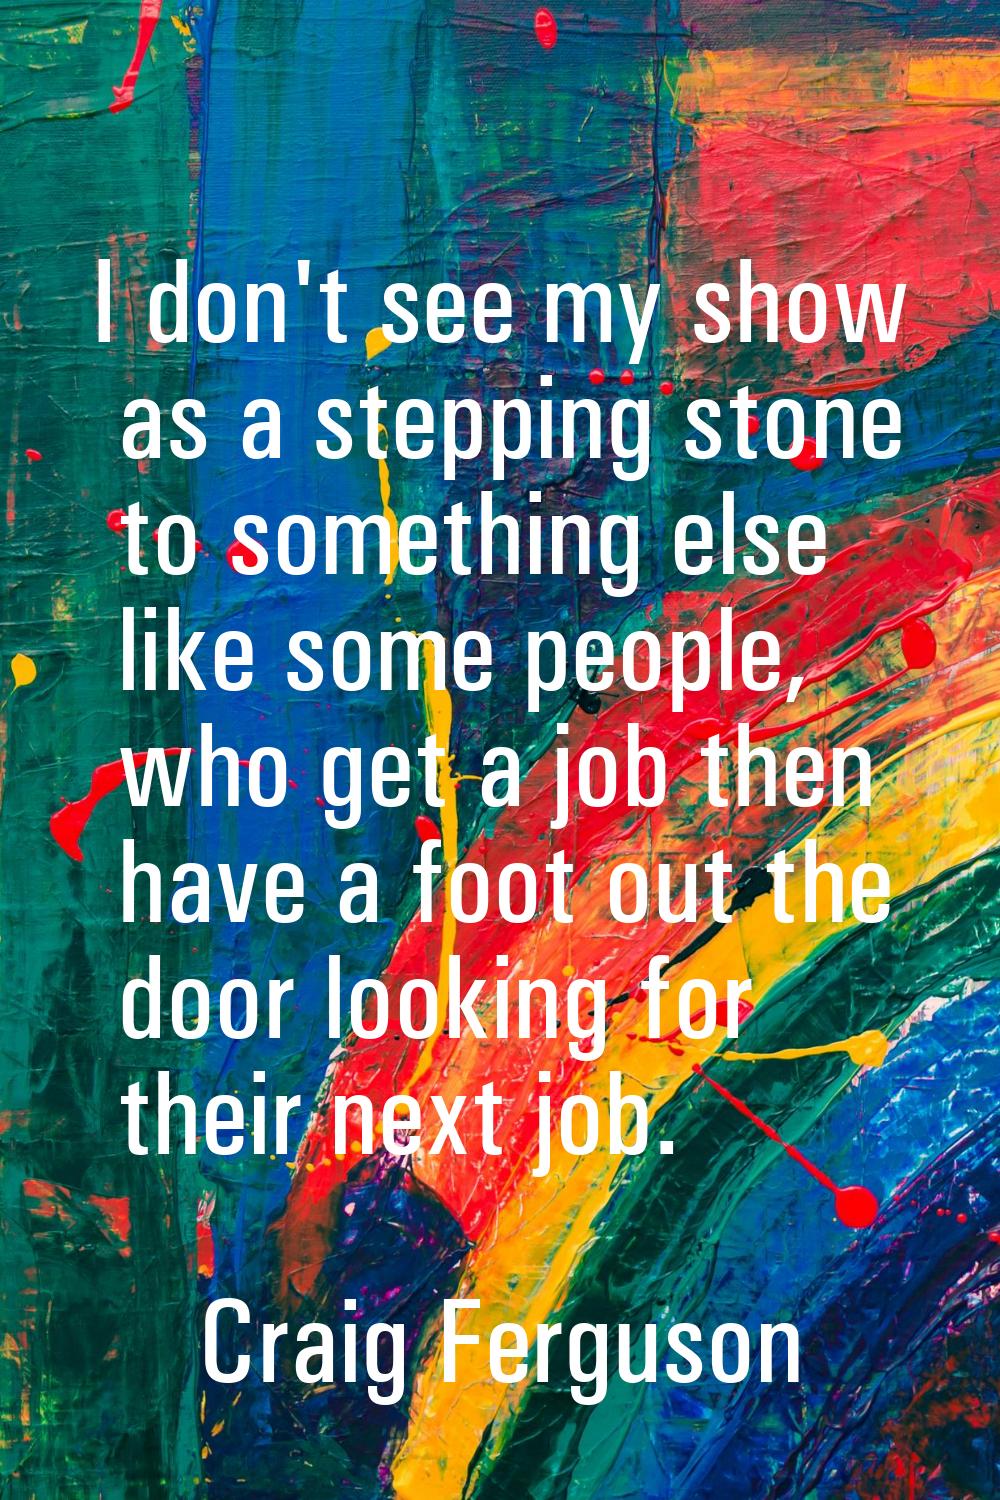 I don't see my show as a stepping stone to something else like some people, who get a job then have